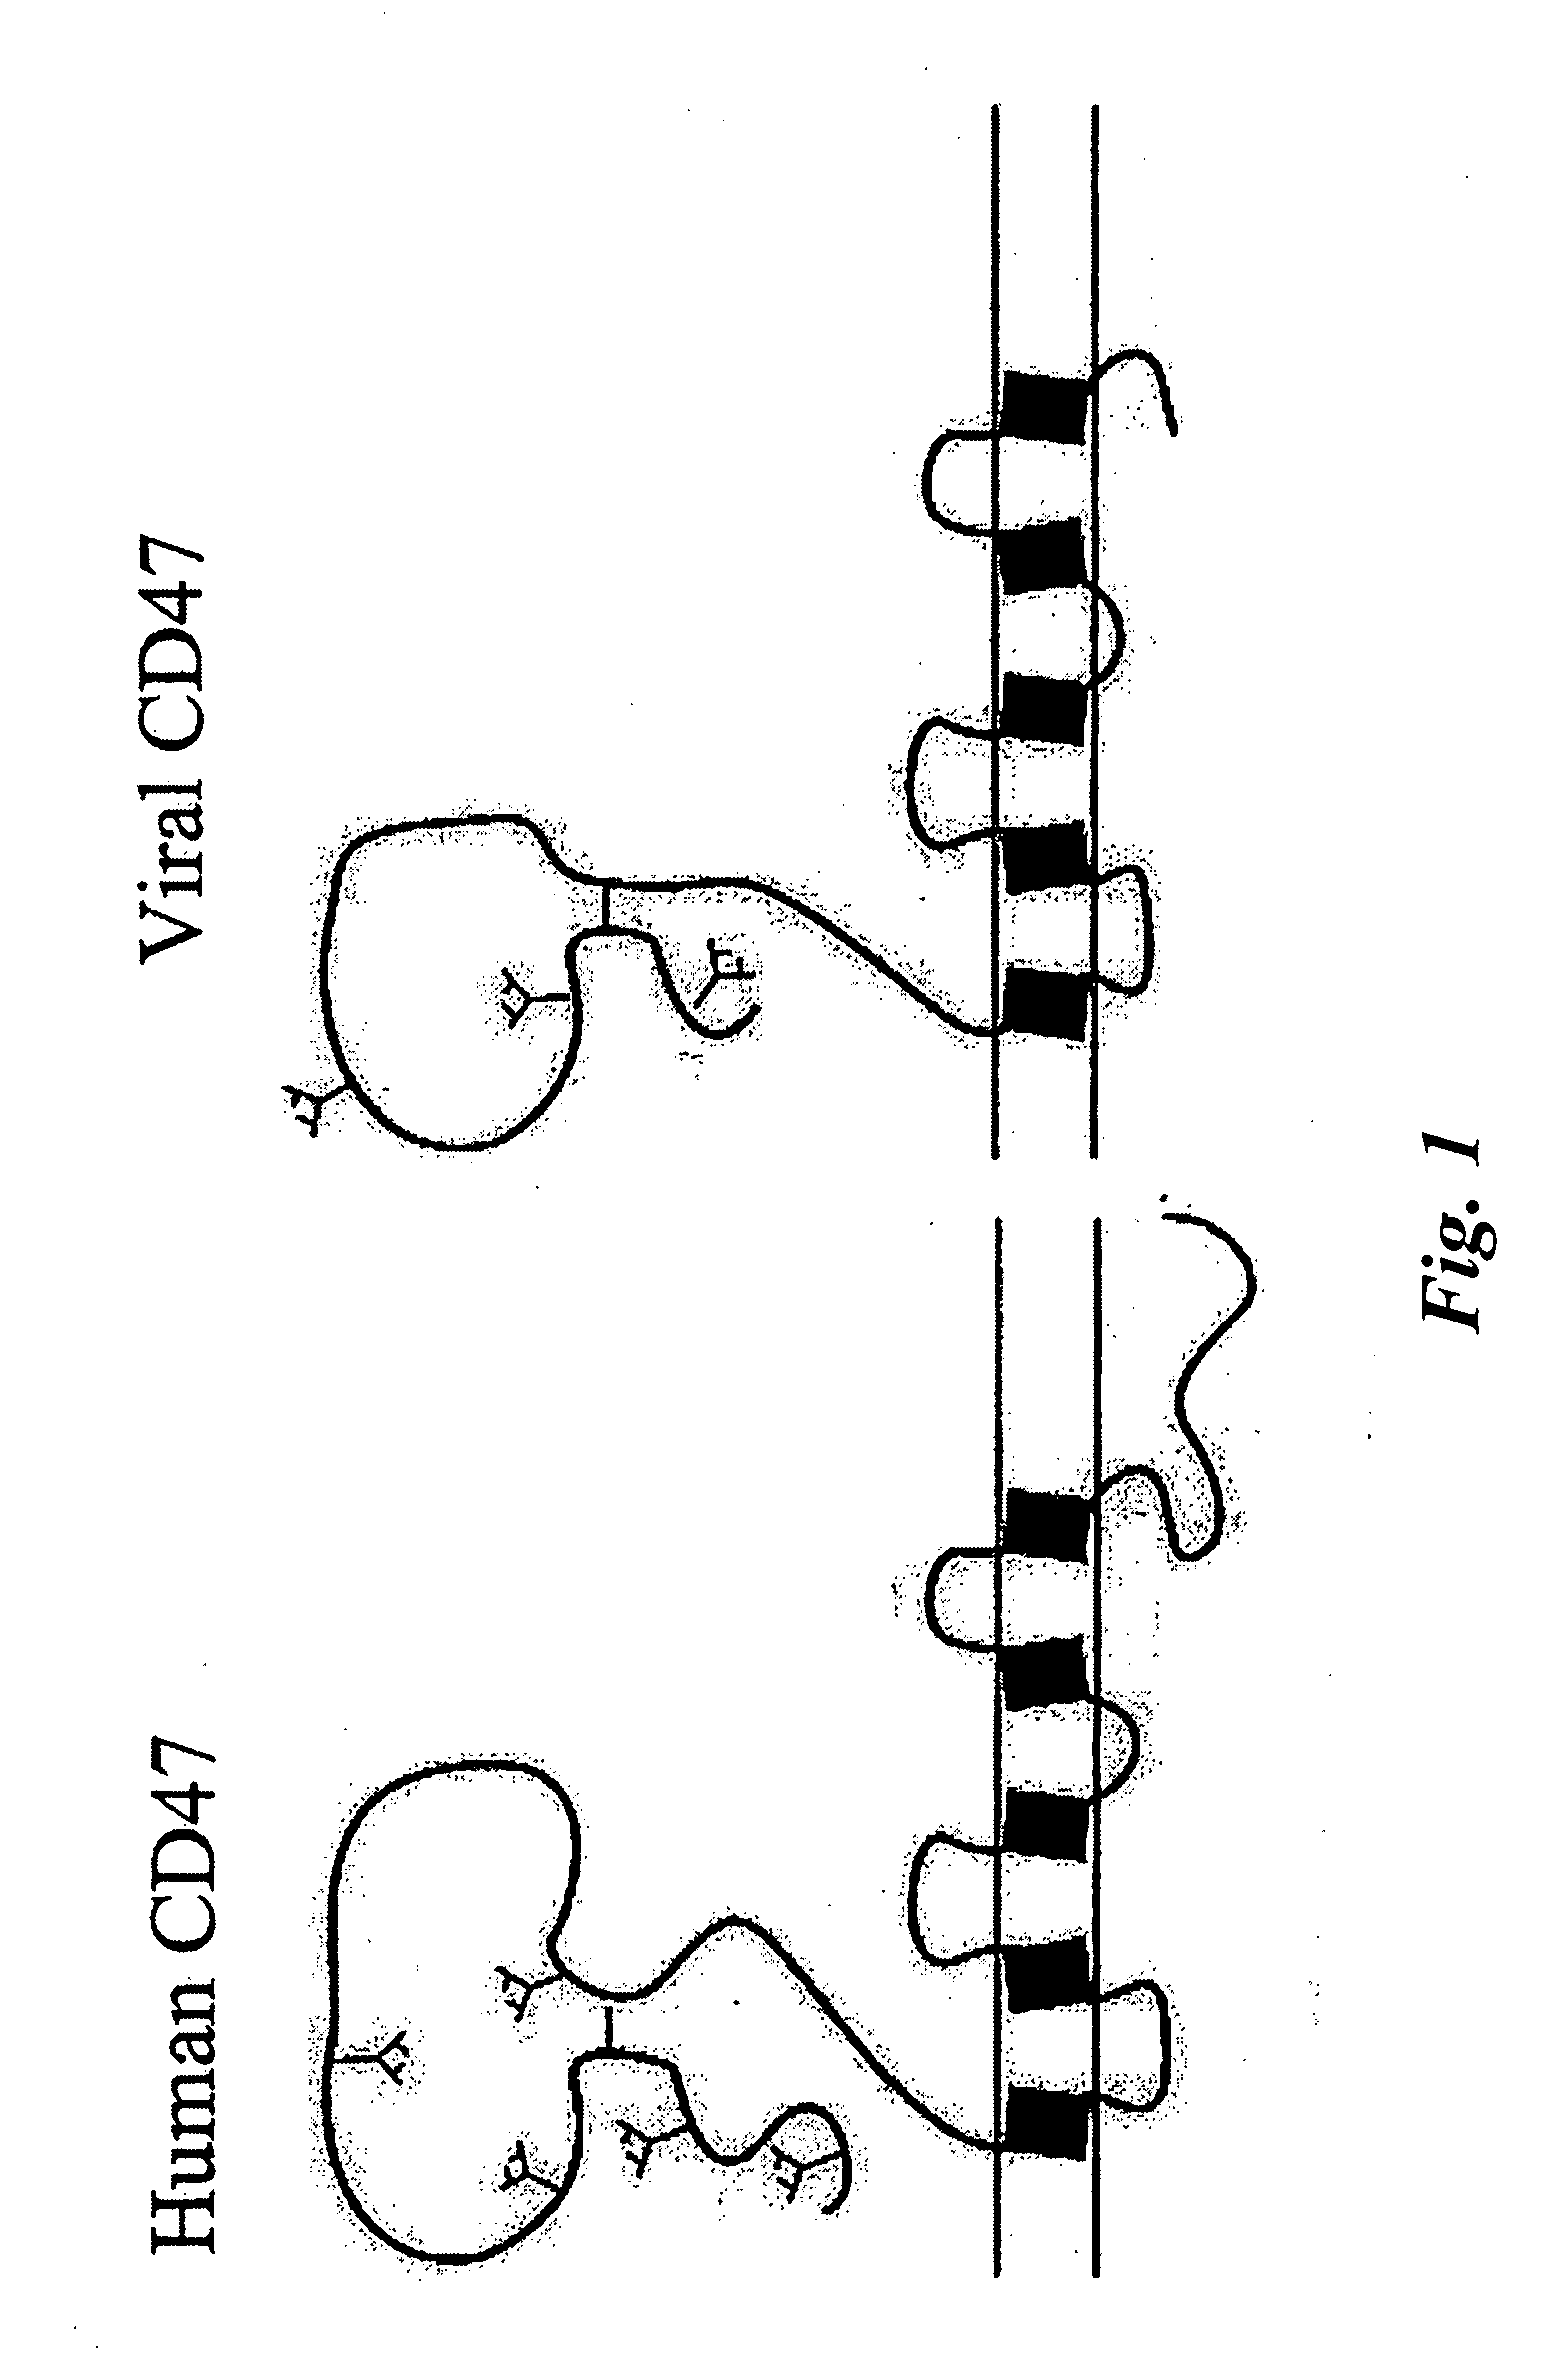 CD47 related compositions and methods for treating immunological diseases and disorders